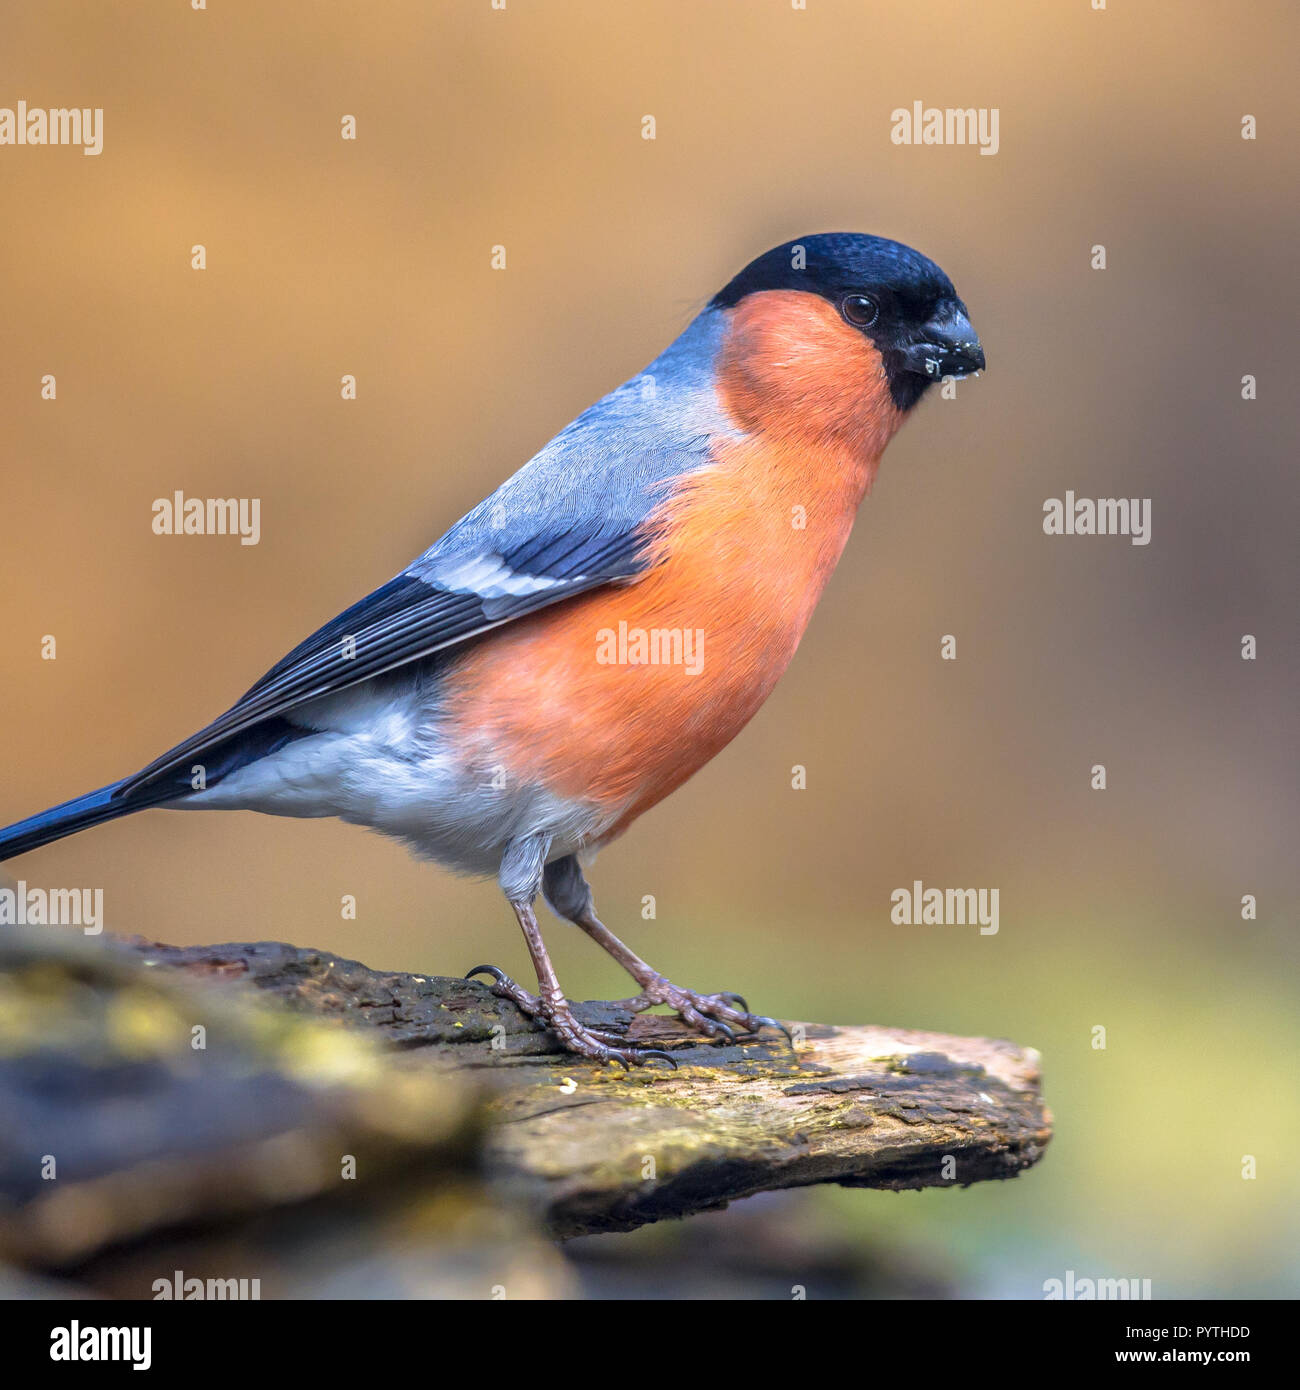 Common or Eurasian bullfinch (Pyrrhula pyrrhula) perched on log. This is a small passerine bird breeding across Europe and temperate Asia. Stock Photo